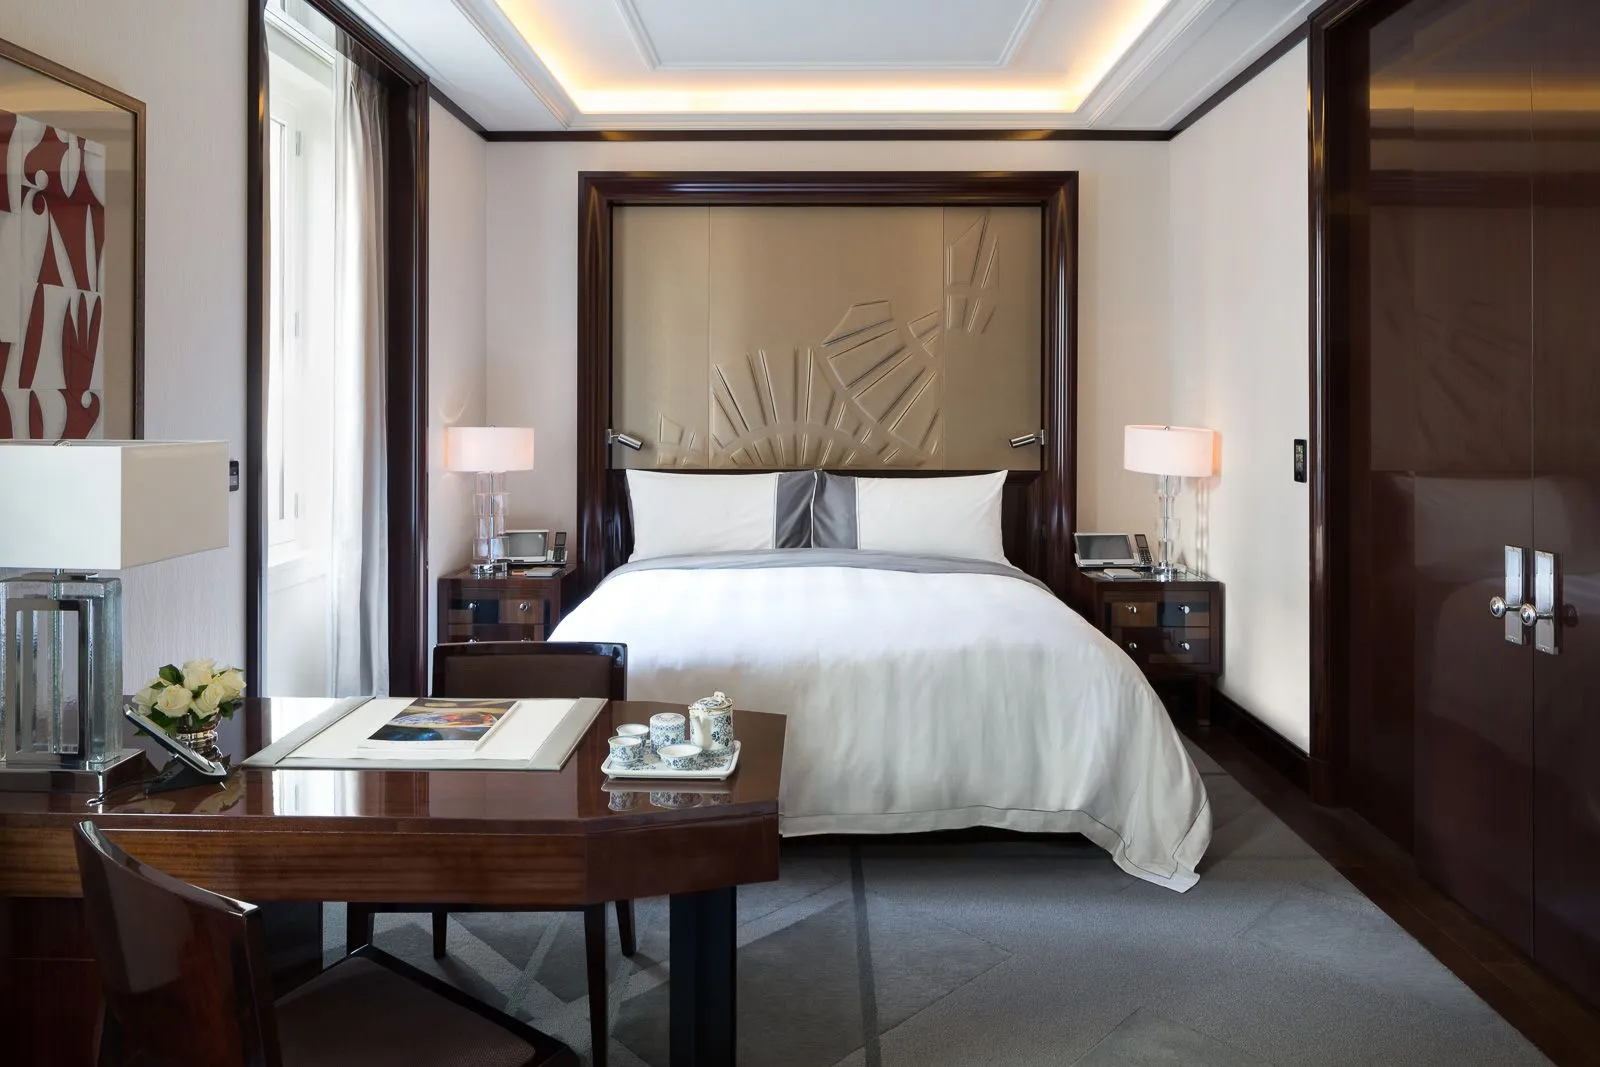 A refined and sustainable bedroom at Peninsula Paris, displaying a luxurious bed with crisp linens, a sleek work desk with traditional tea service, and warm ambient lighting, capturing the essence of eco-friendly elegance.